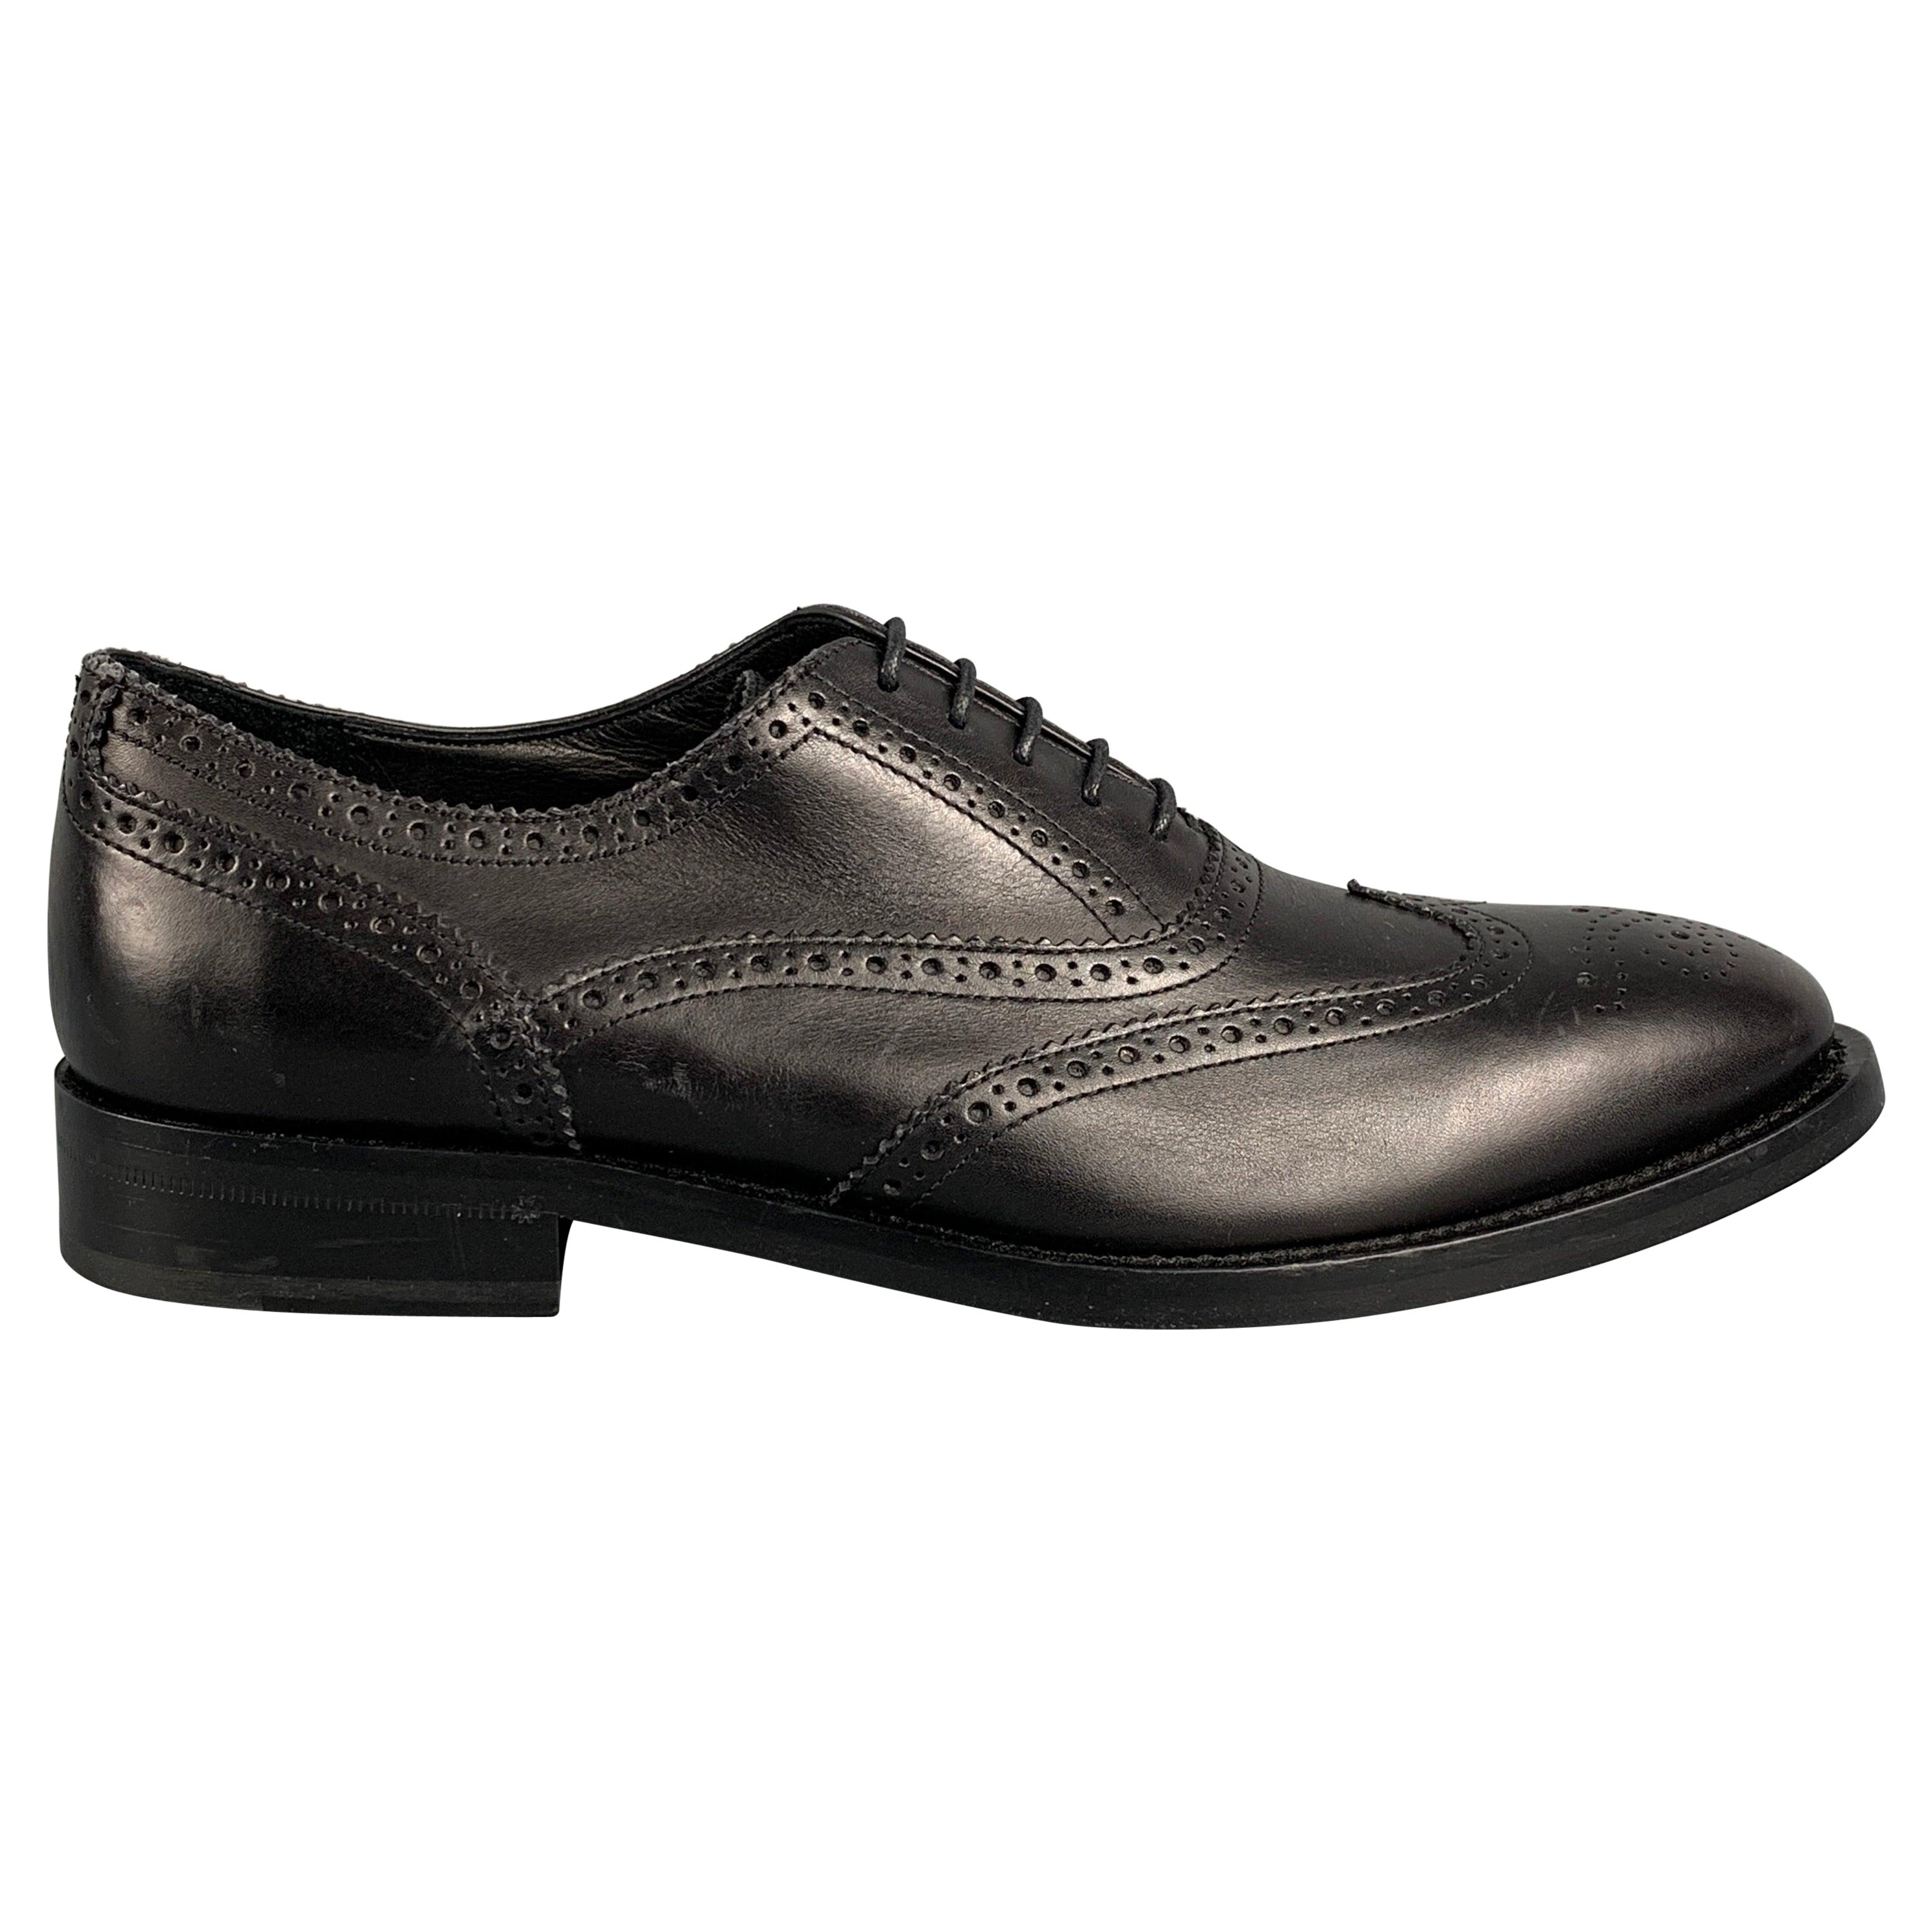 PAUL SMITH Size 9 Black Perforated Leather Wingtip Lace Up Shoes For Sale